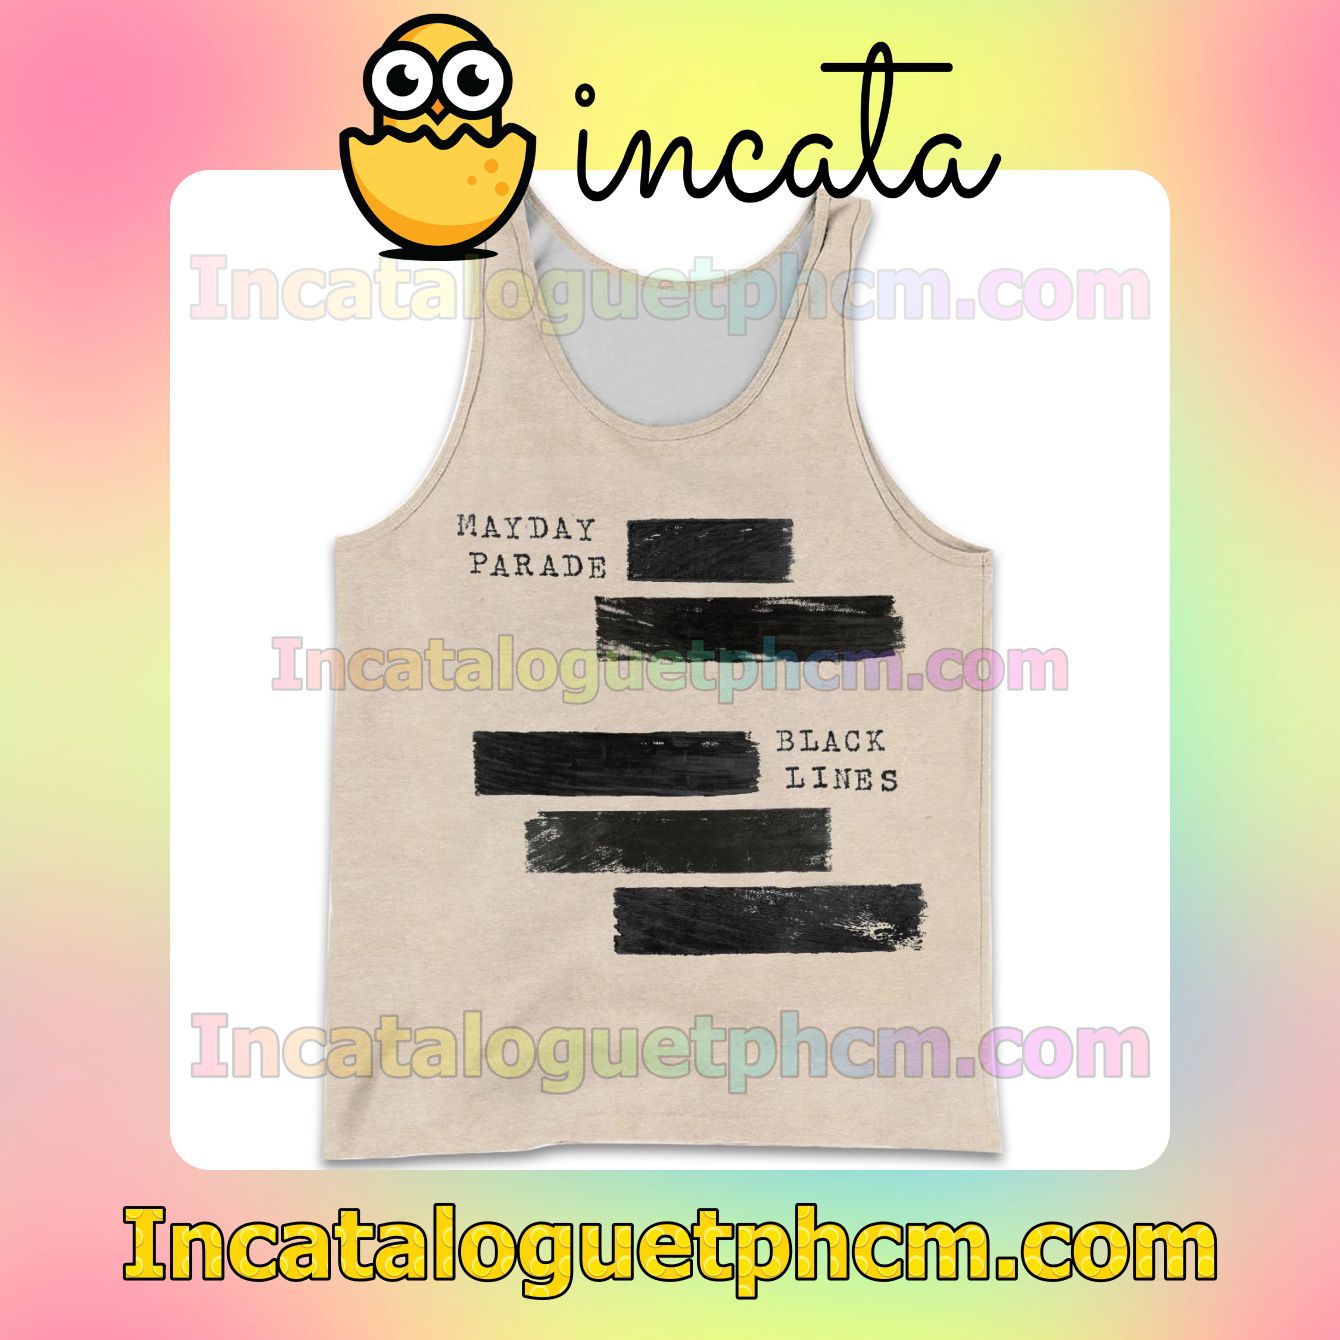 Unisex Personalized Mayday Parade Black Lines Album Cover Workout Tank Top